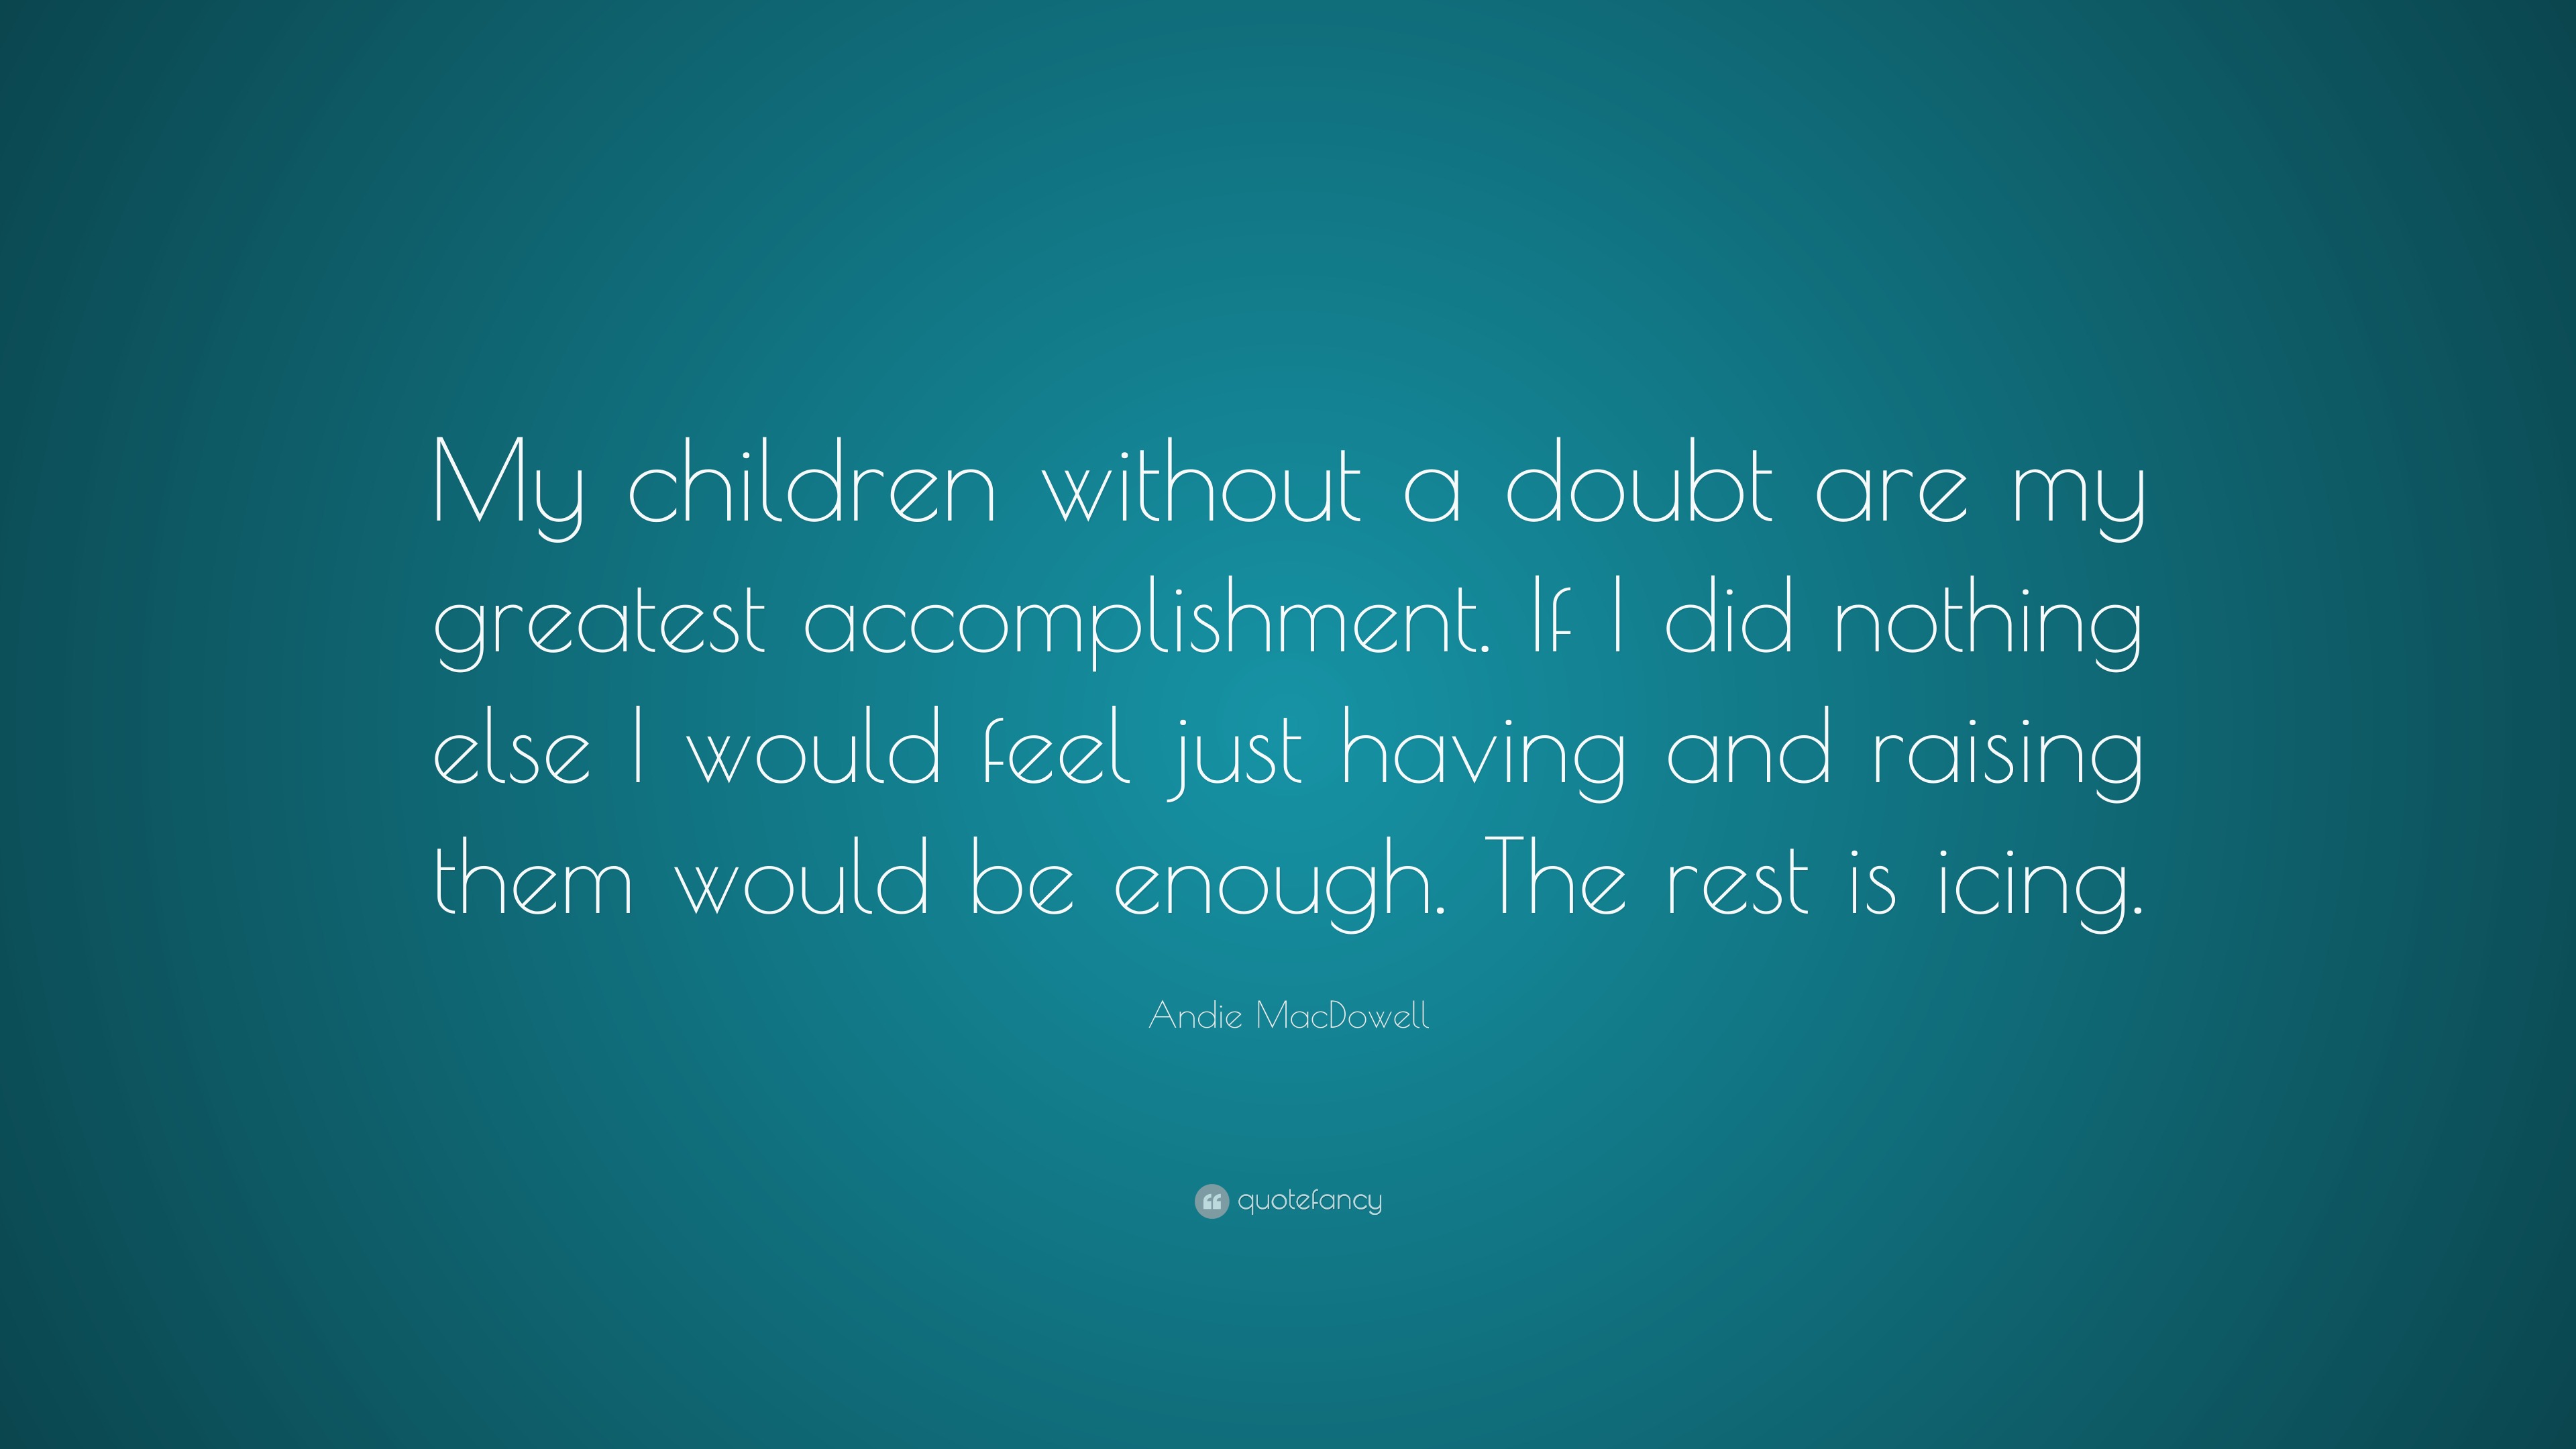 Andie MacDowell Quote: “My children without a doubt are my greatest ...